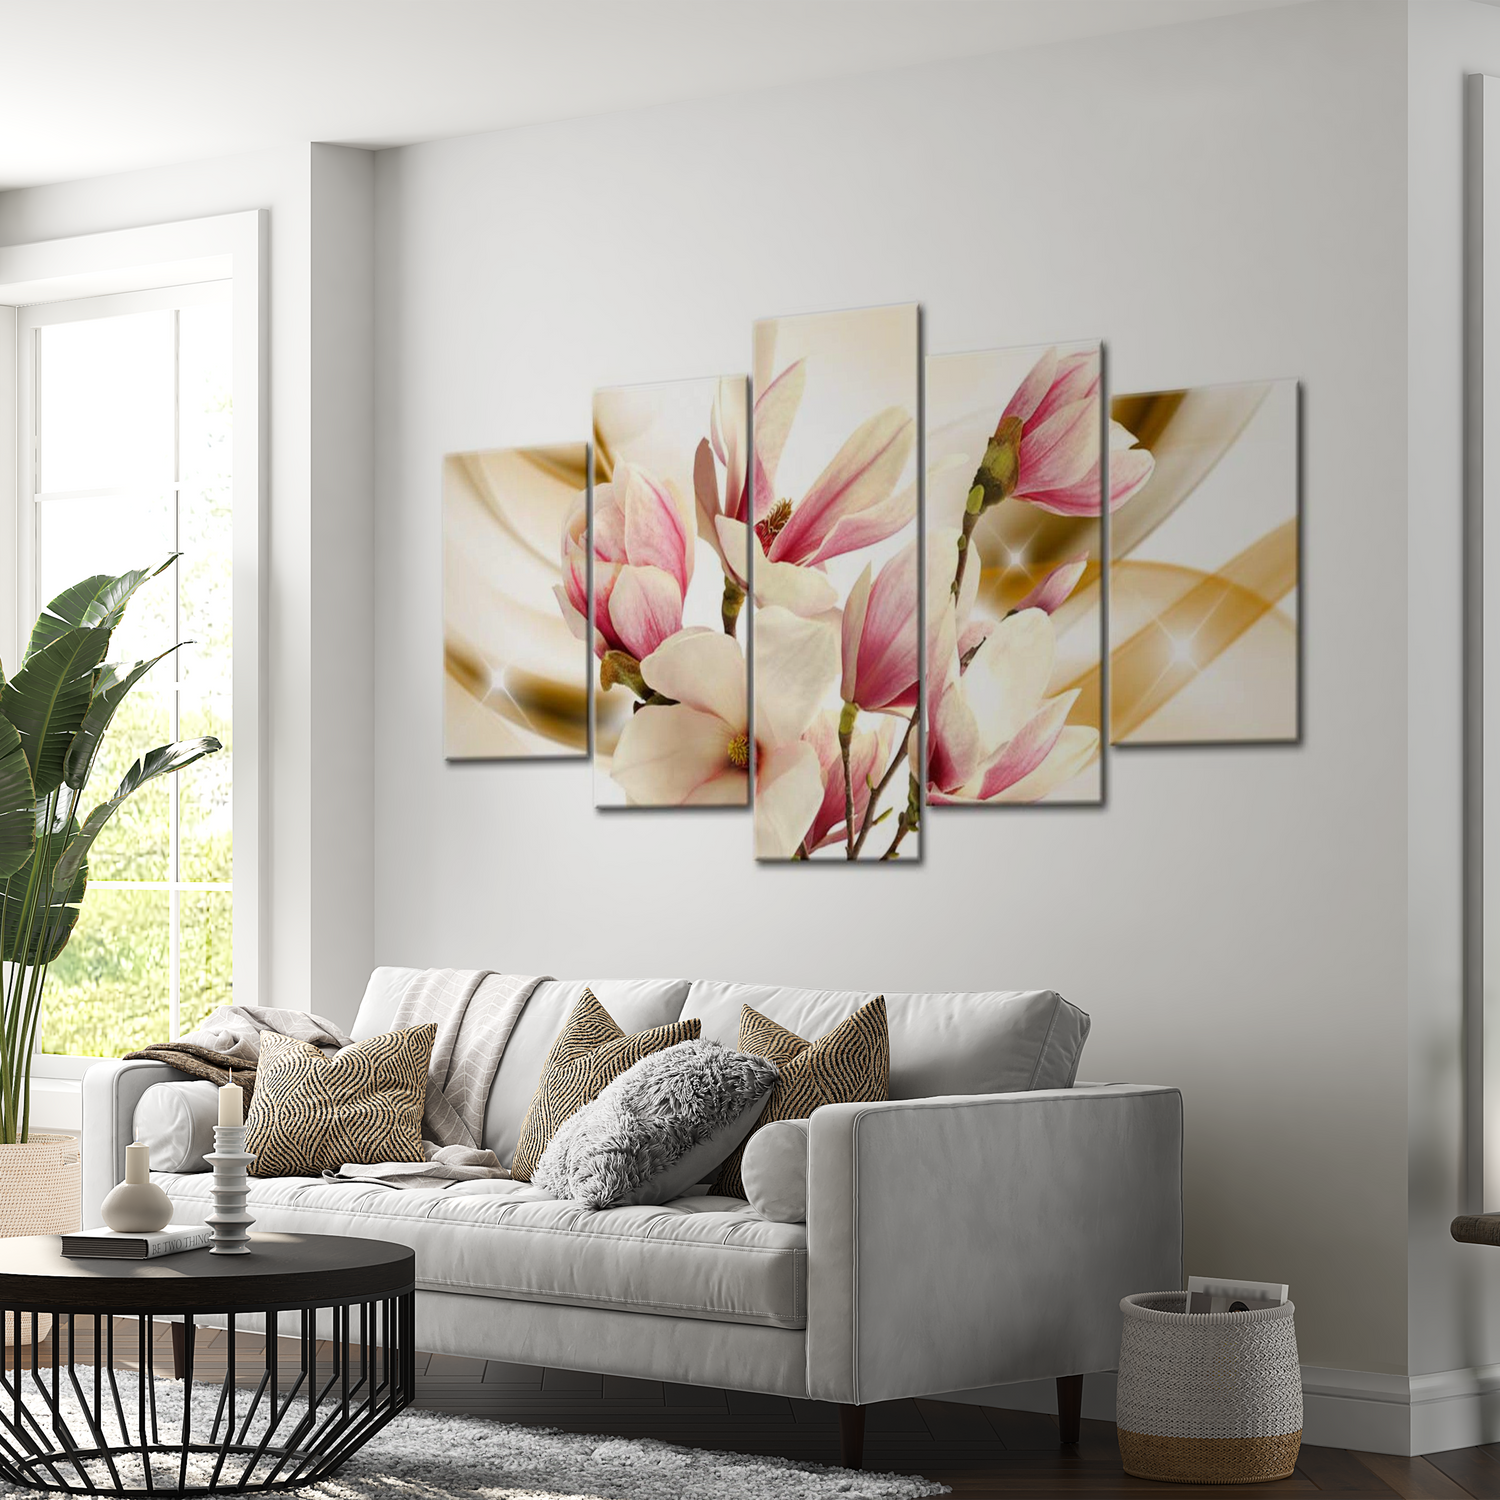 Stretched Canvas Floral Art - Breeze Of The Gentleness 40"Wx20"H